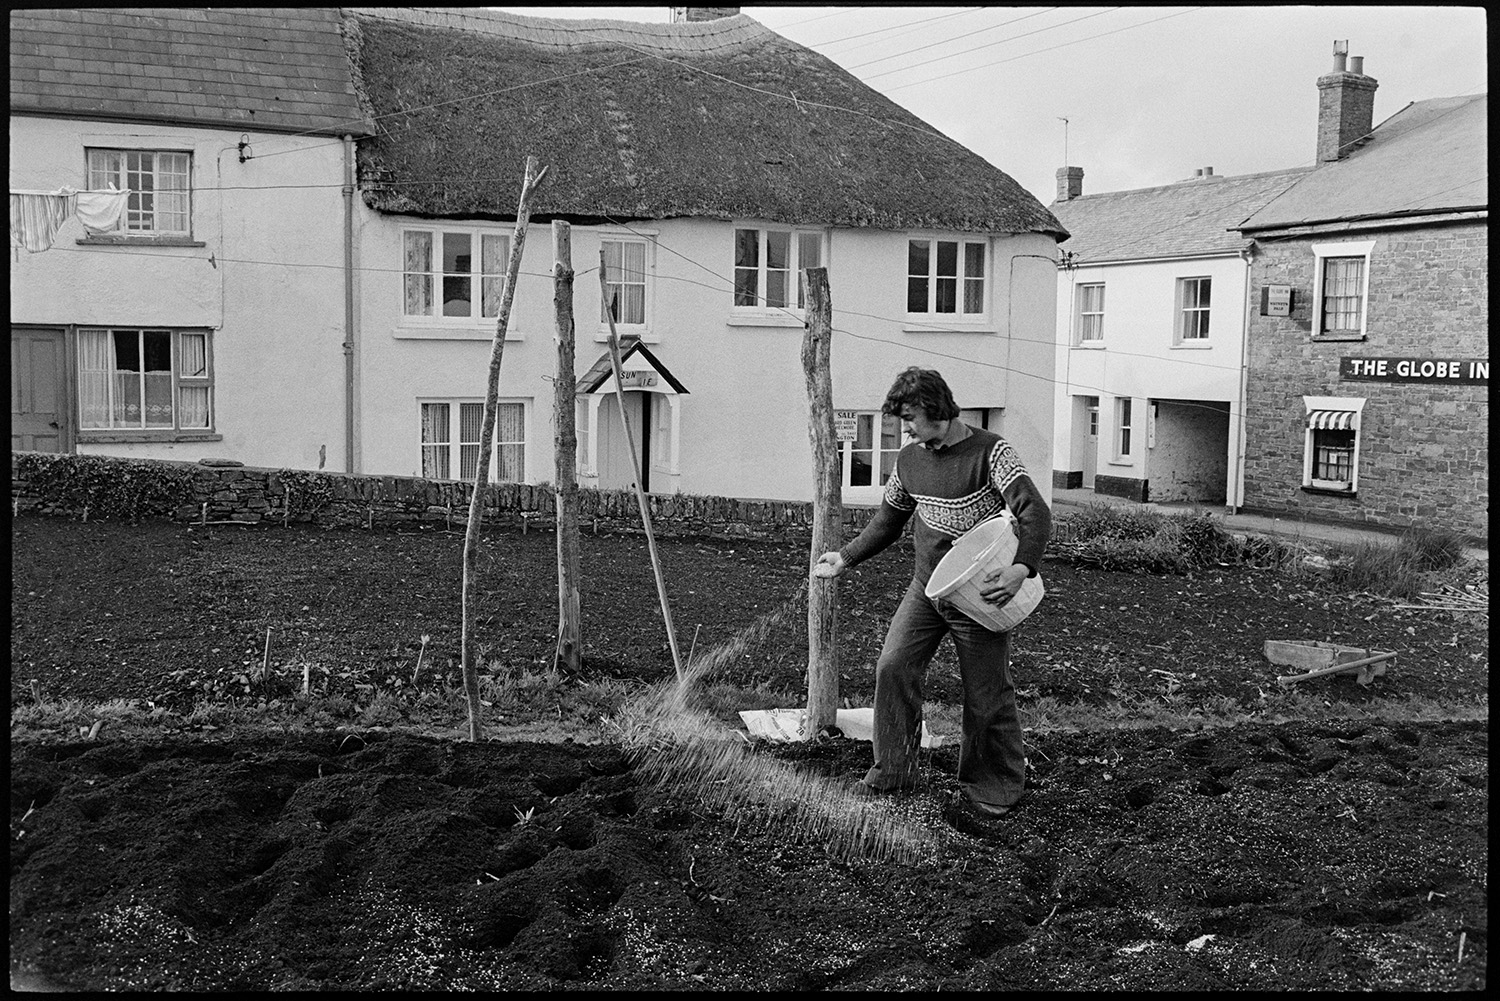 Man sowing seeds or fertilizer in garden. 
[A man sowing or broadcasting seeds or fertilizer, from a bucket by hand, in a garden at Tricks Terrace, Beaford. A thatched cottage and The Globe Inn can be seen in the background.]